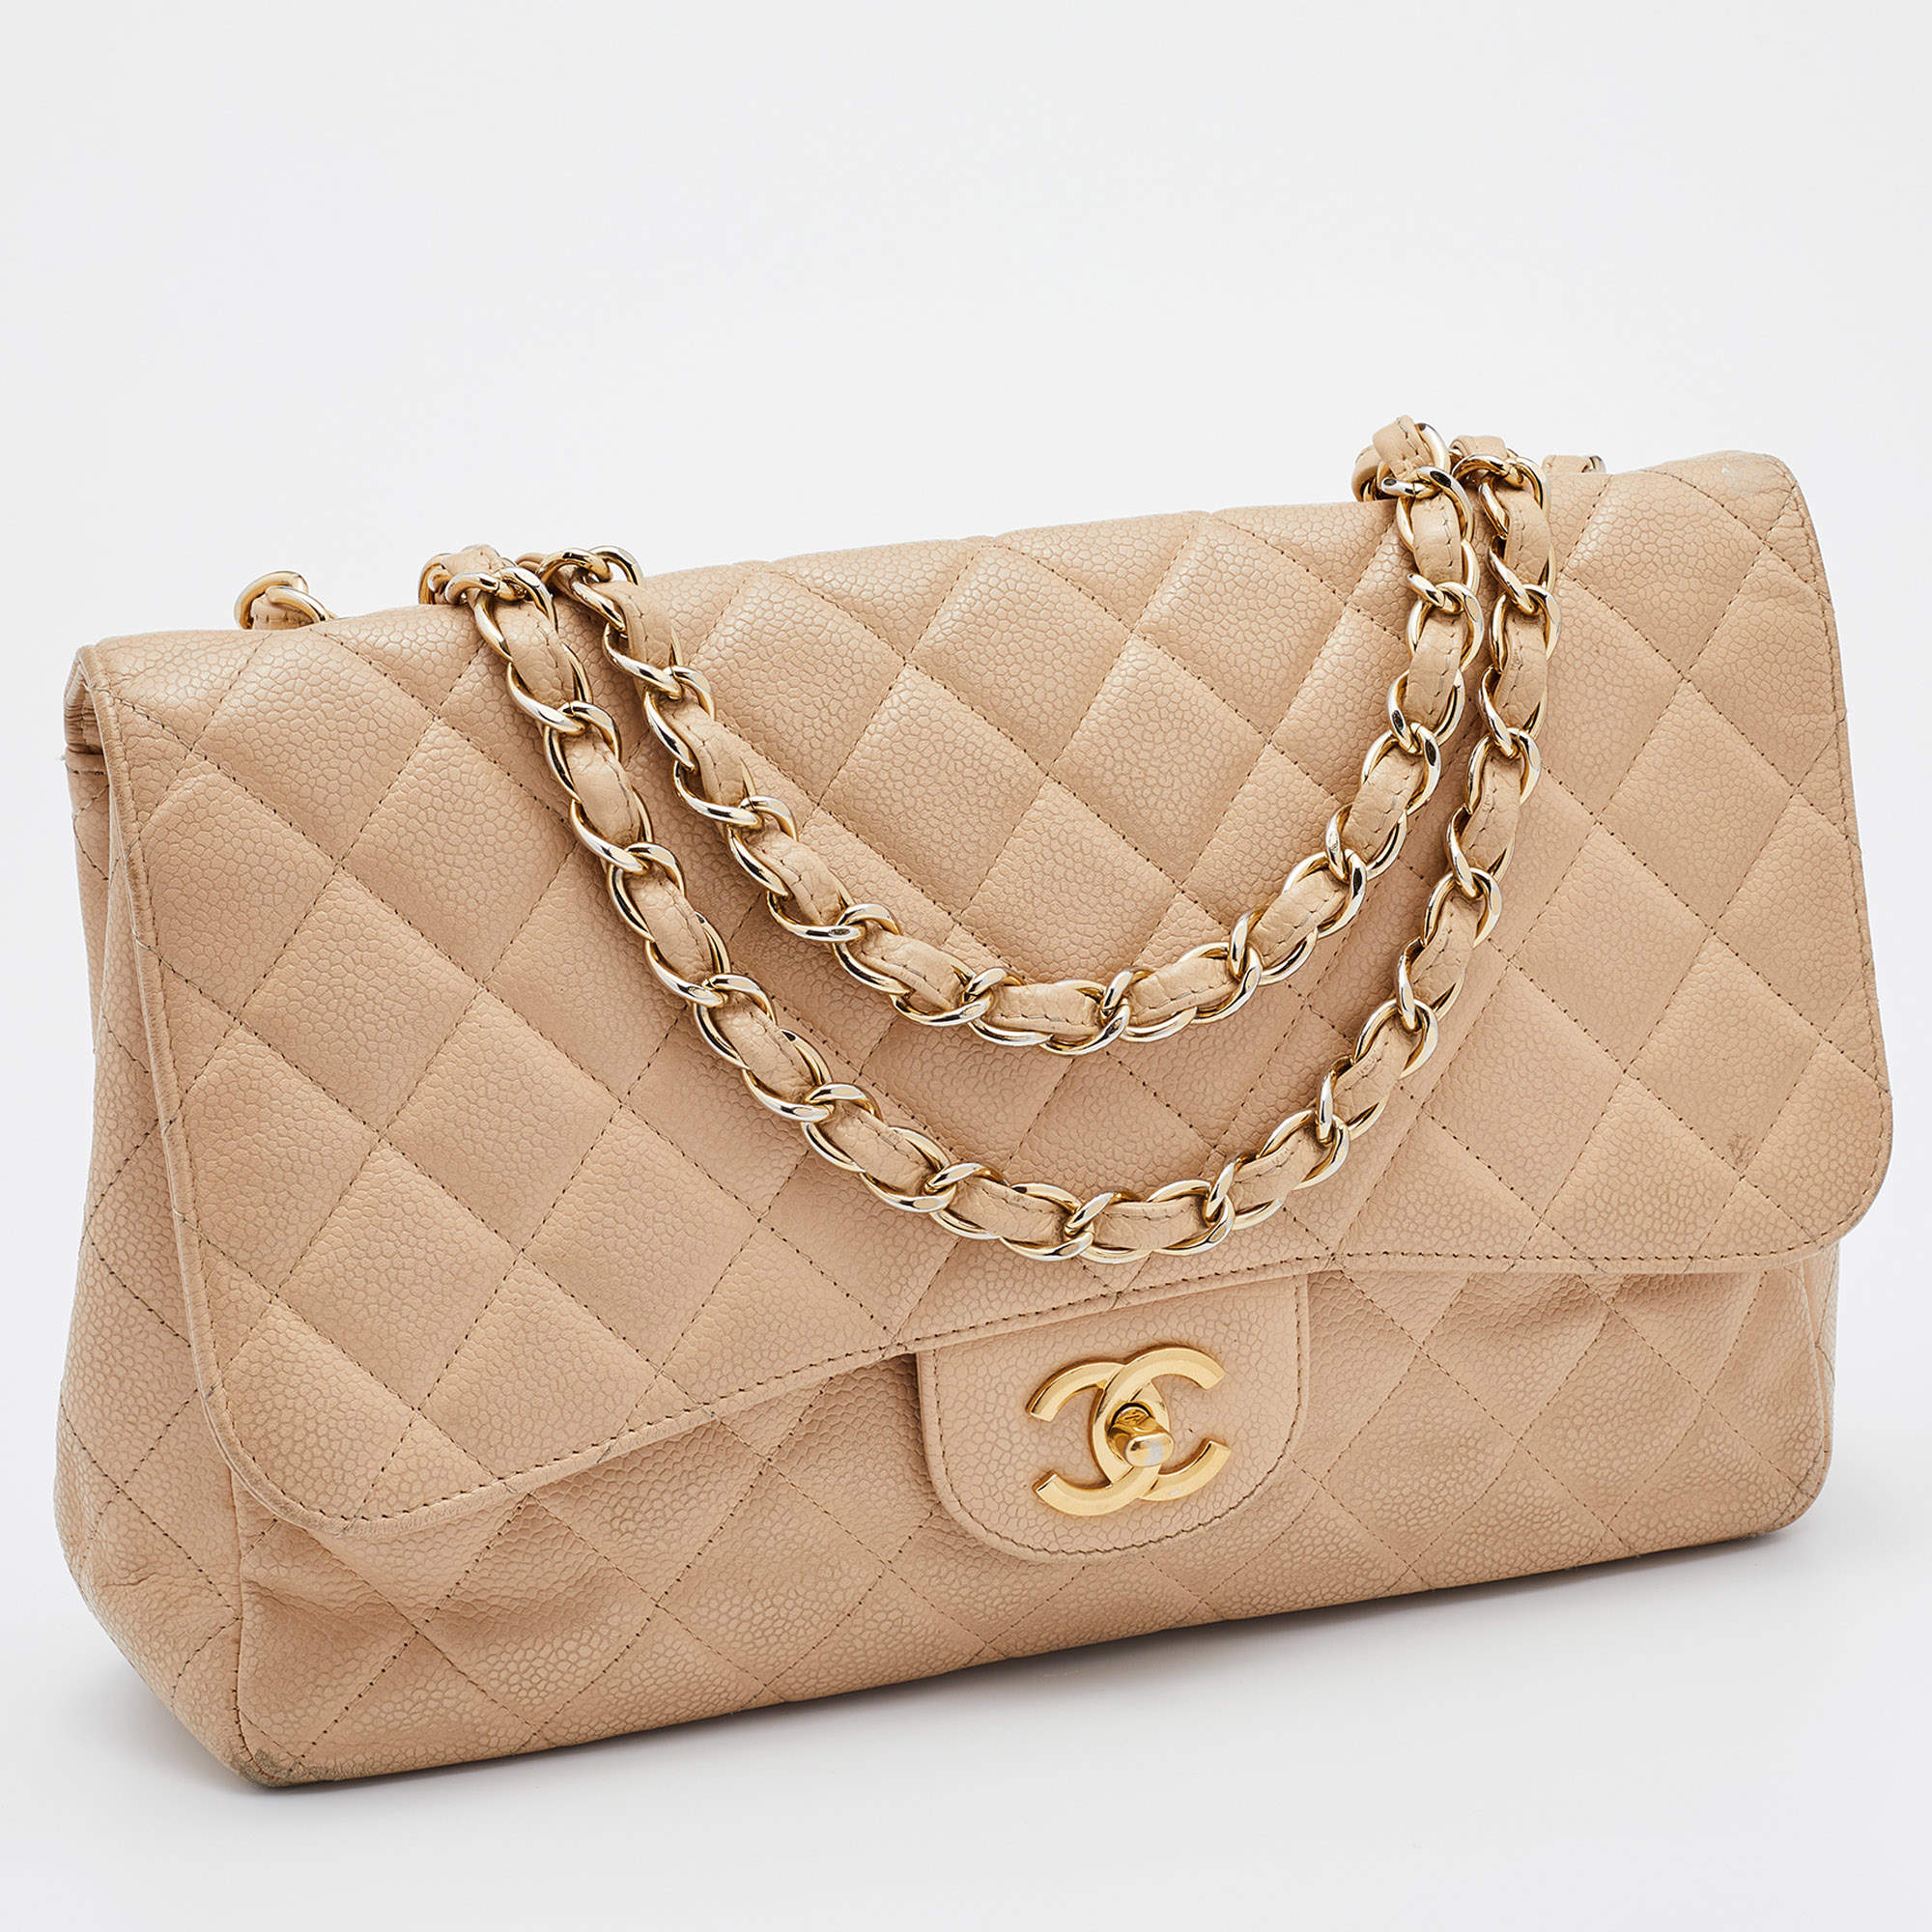 Chanel Beige Quilted Caviar Leather Jumbo Classic Flap Bag Chanel